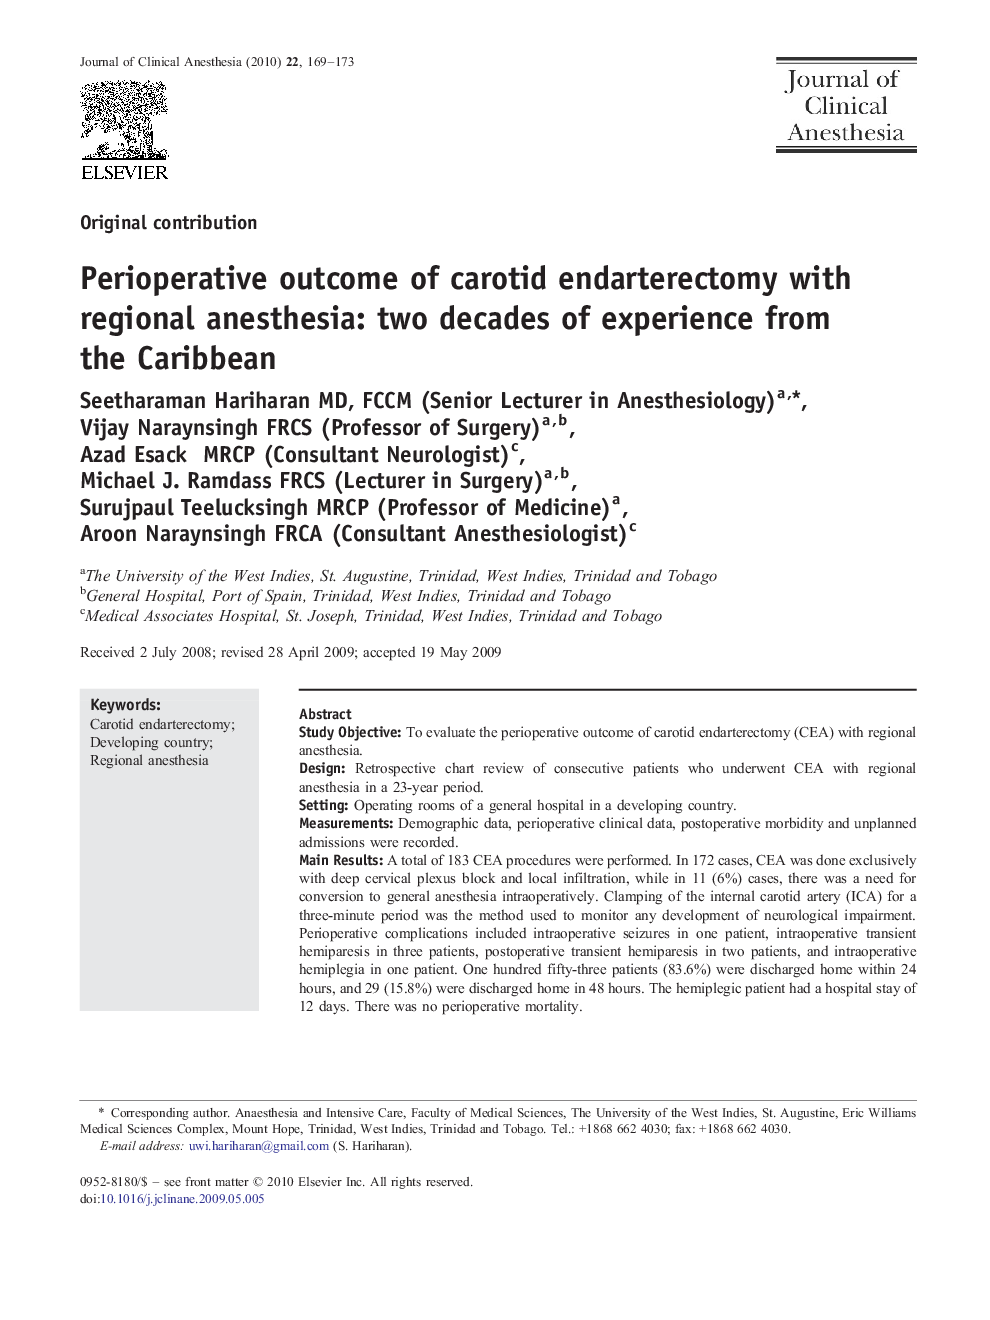 Perioperative outcome of carotid endarterectomy with regional anesthesia: two decades of experience from the Caribbean